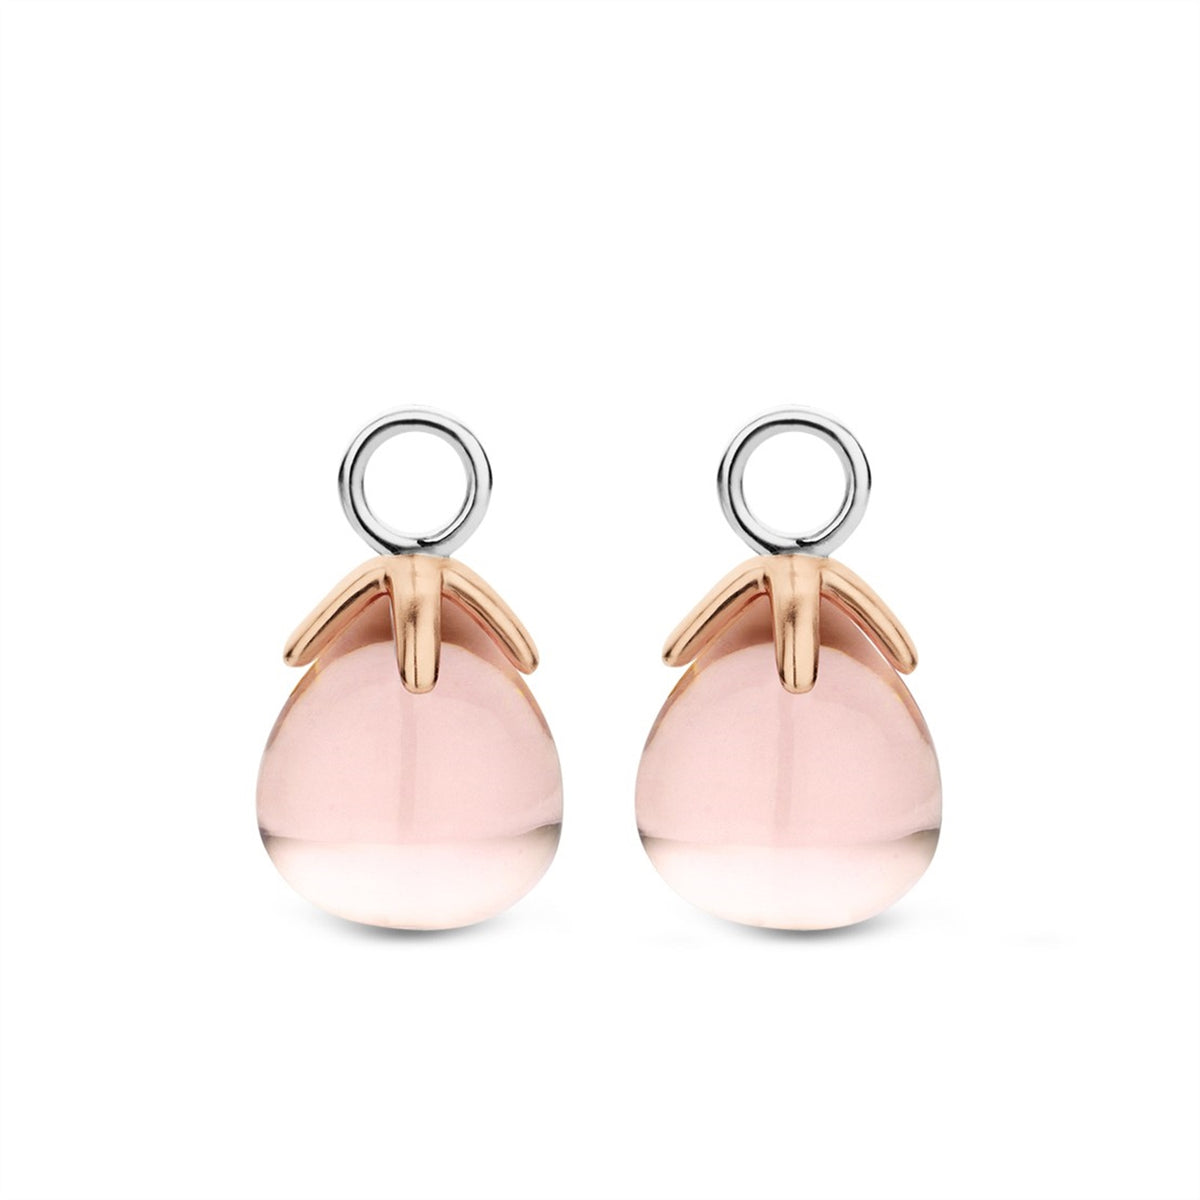 TI SENTO Sterling Silver and Rose Tone Ear Charms with Pink Stone Drops